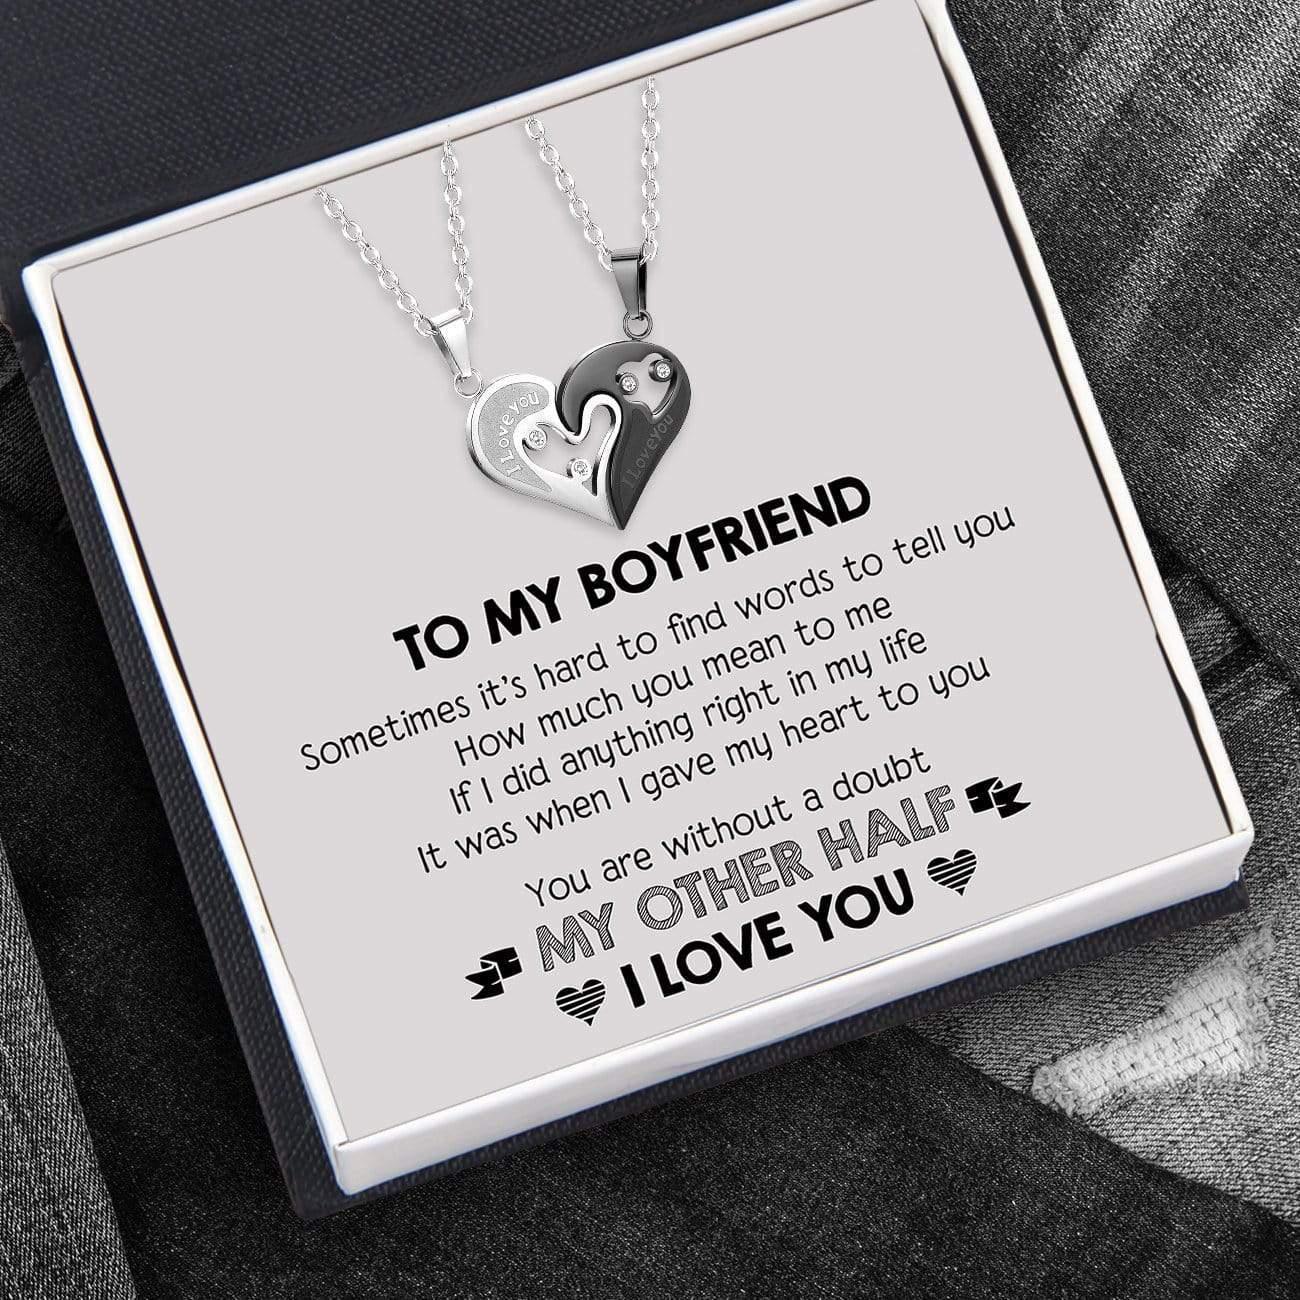 Couple Heart Necklaces - To My Boyfriend - How Much You Mean To Me - Auglt12001 - Gifts Holder